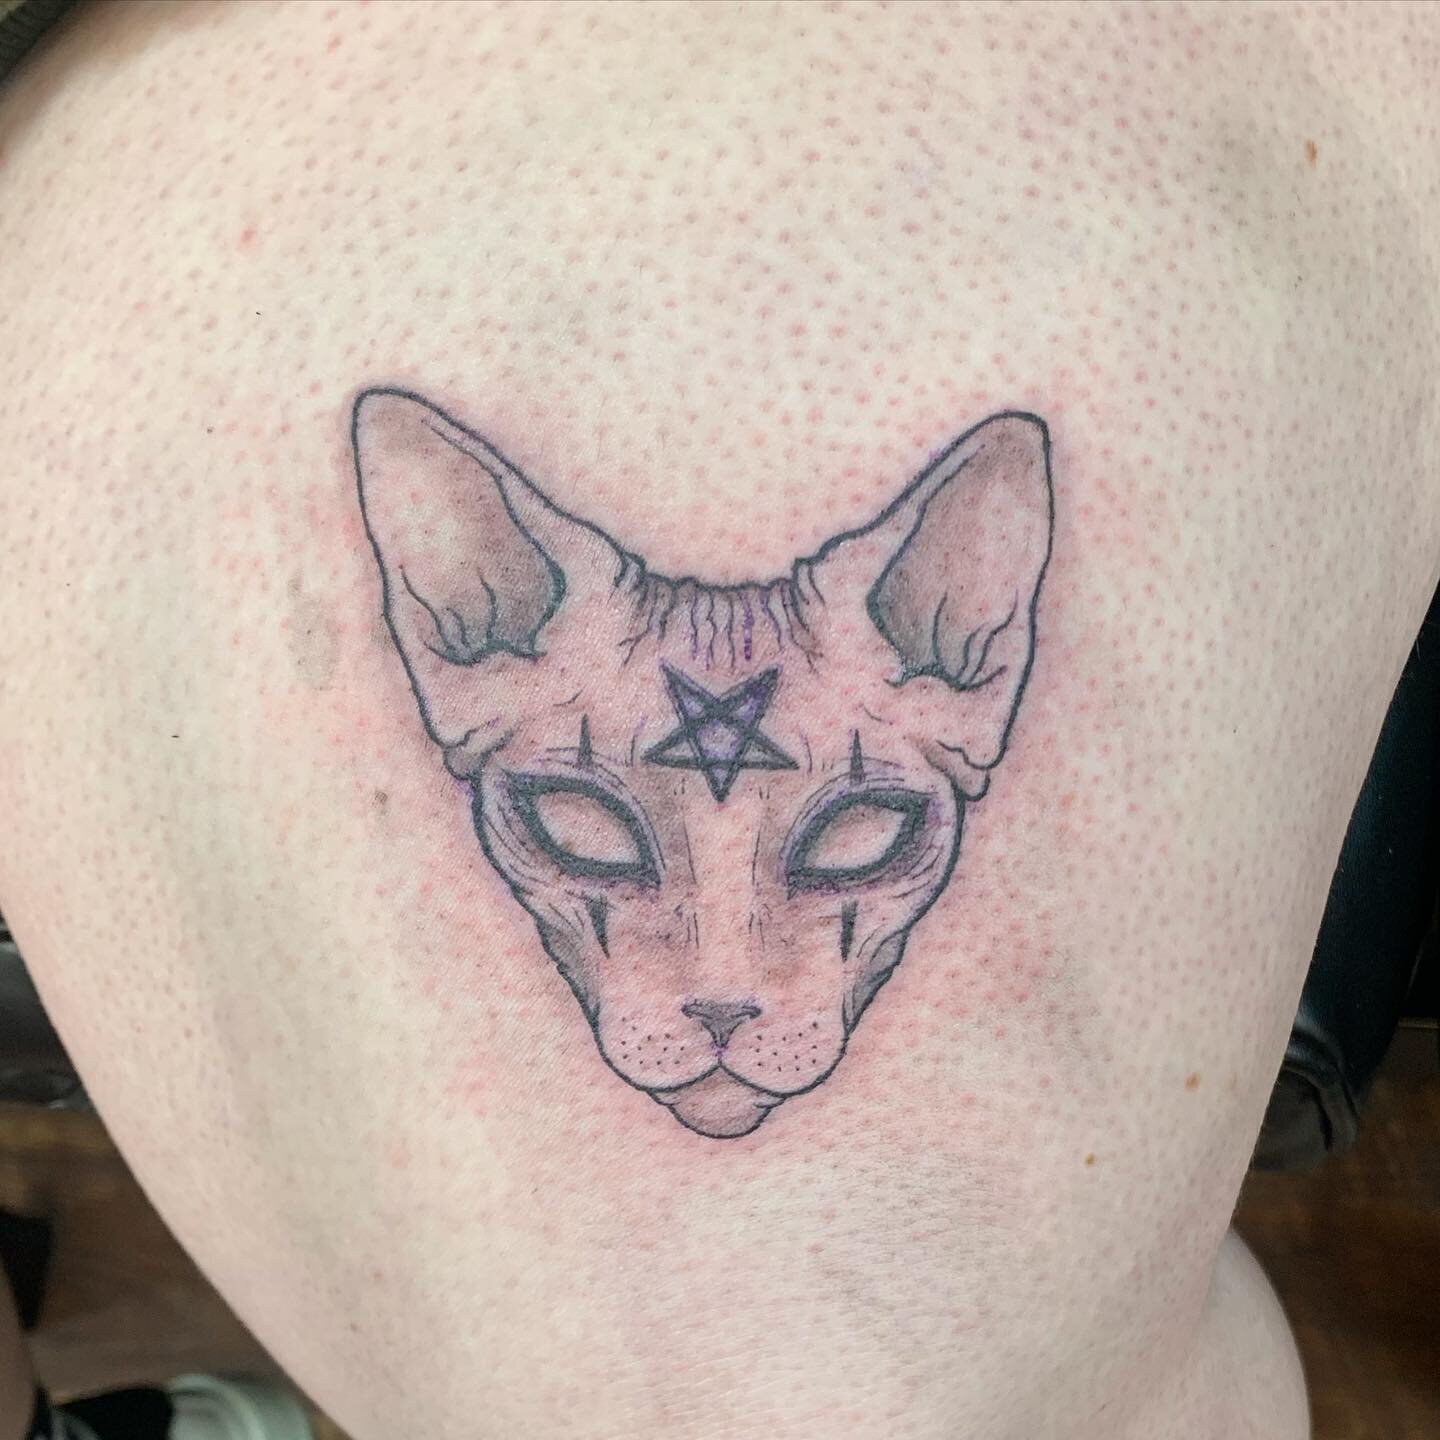 Spooky Sphynx 🙀 I have just a few spots left this year, send your inquiries via 🔗in bio
.
.
.
.
.
#tattoo #michigantattooartist #southeastmichigan #detroittattooartist #cattattoo #sphynx #sphynxcat #hairlesscat